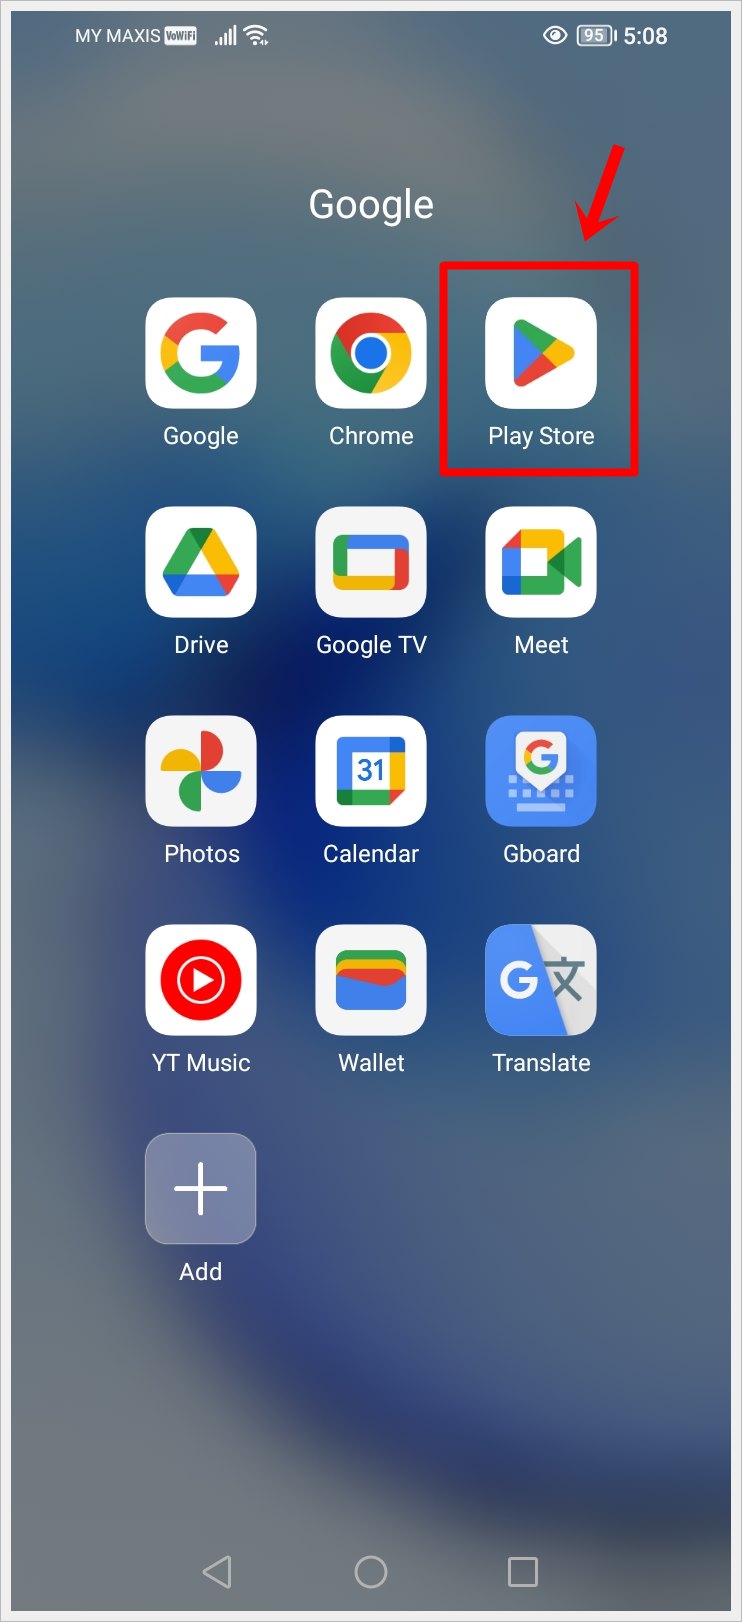 This image shows a screenshot of an Android phone with the Google Play Store icon highlighted.